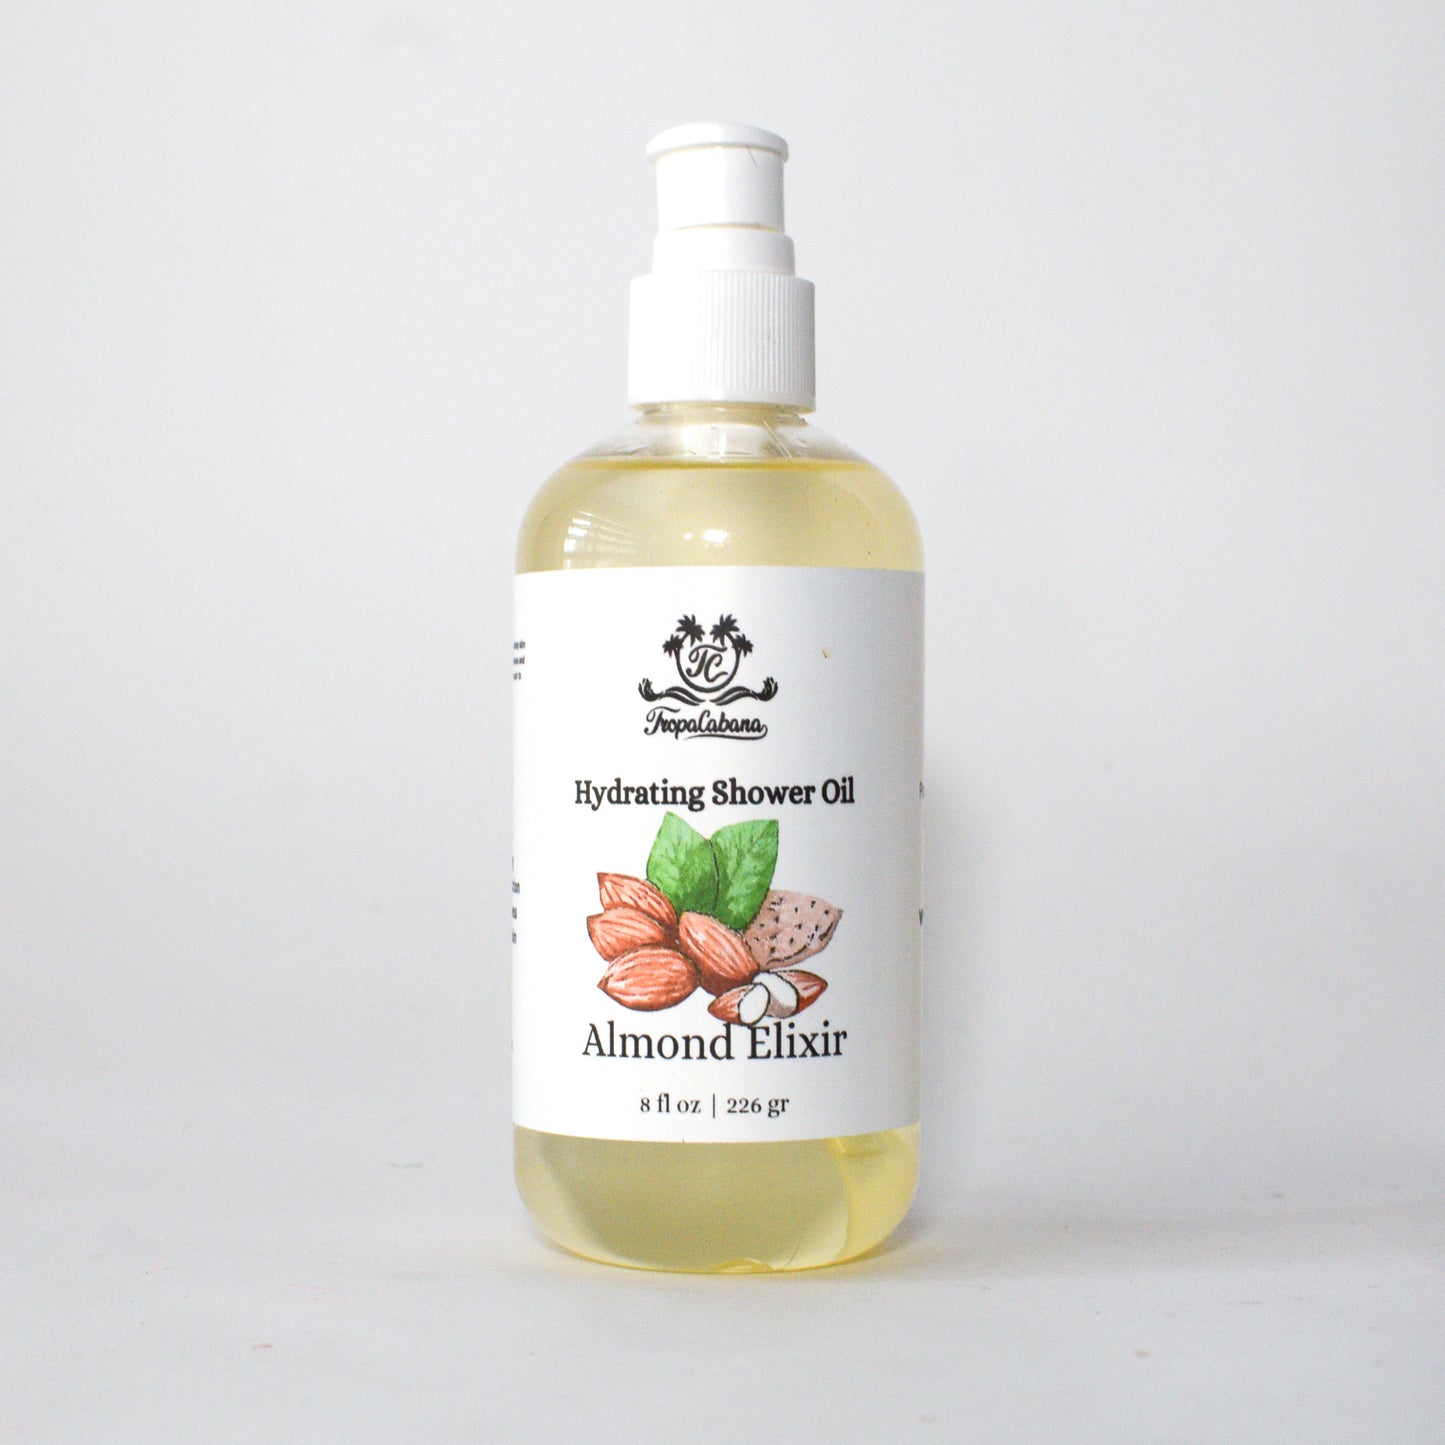 8 oz Almond Elixir Shower Oil, Hydrating Shower Oil, Vegan, Natural Skincare Product, Beauty Product